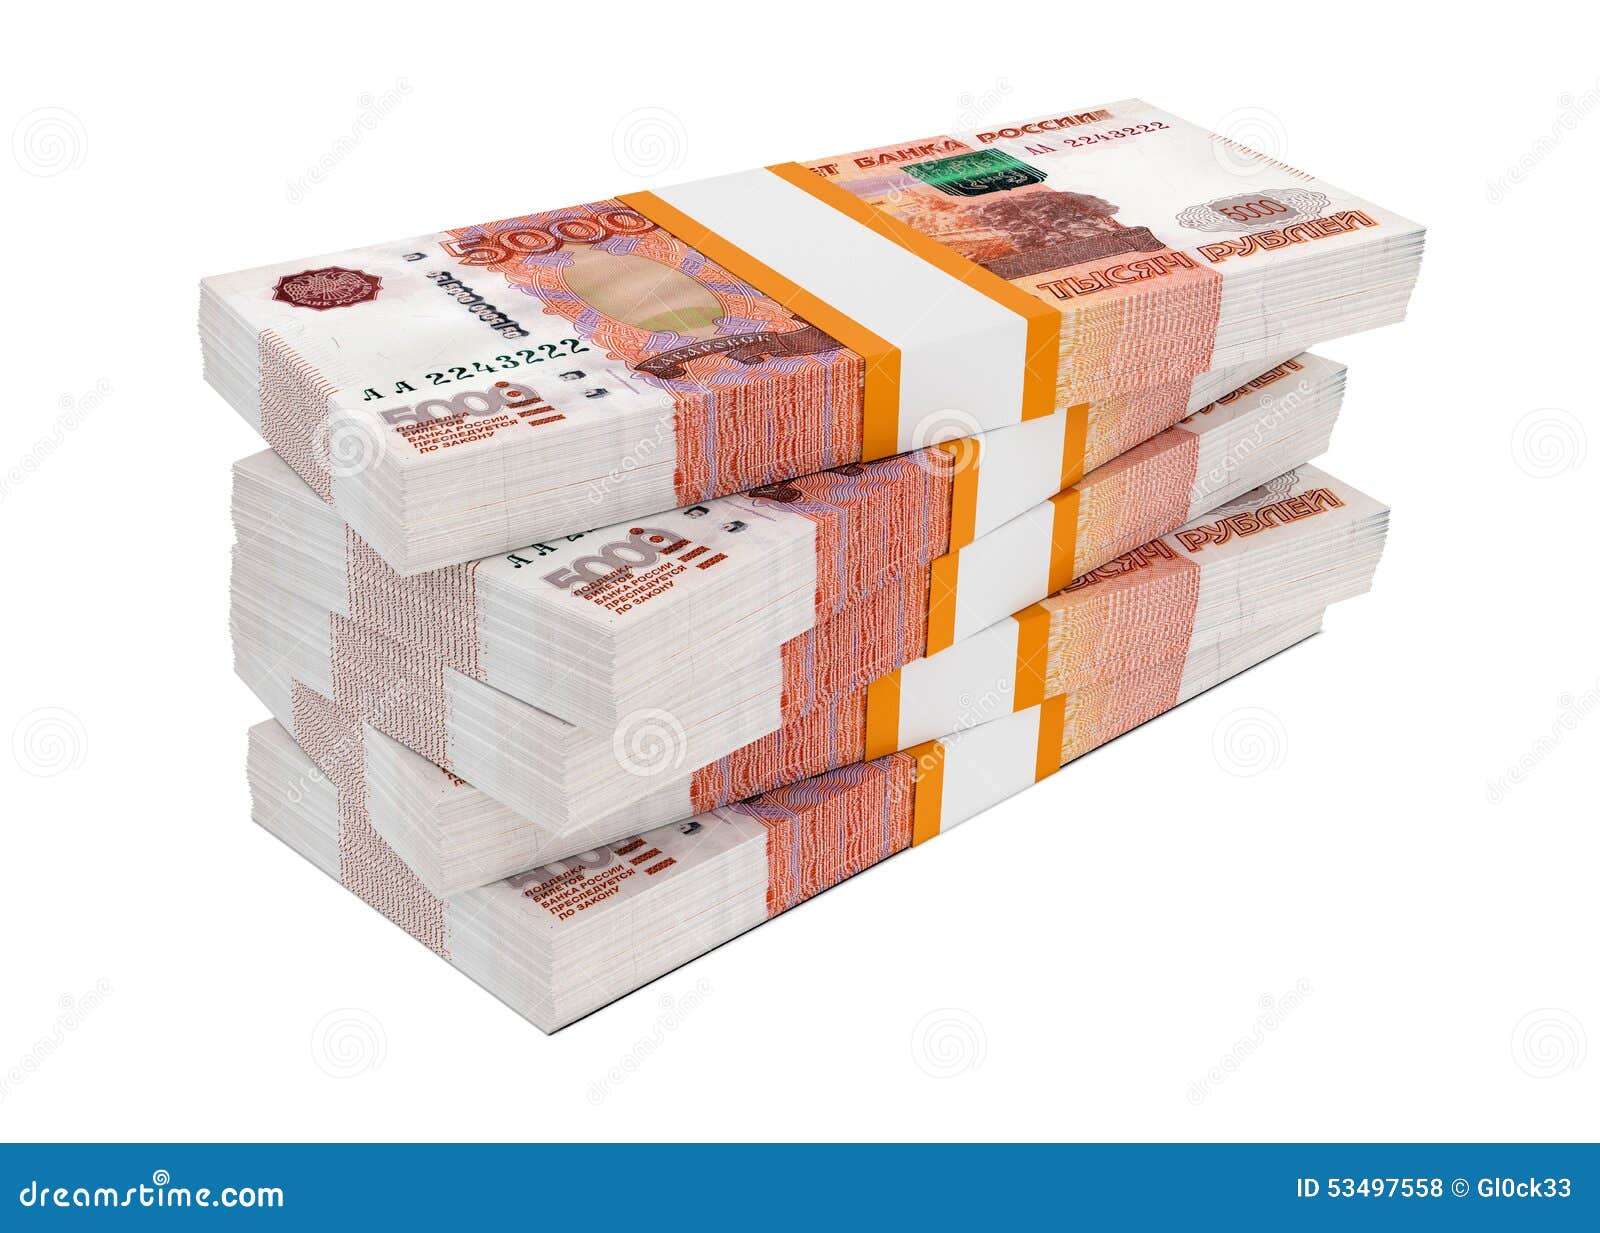 russian rubles bills packs on stack